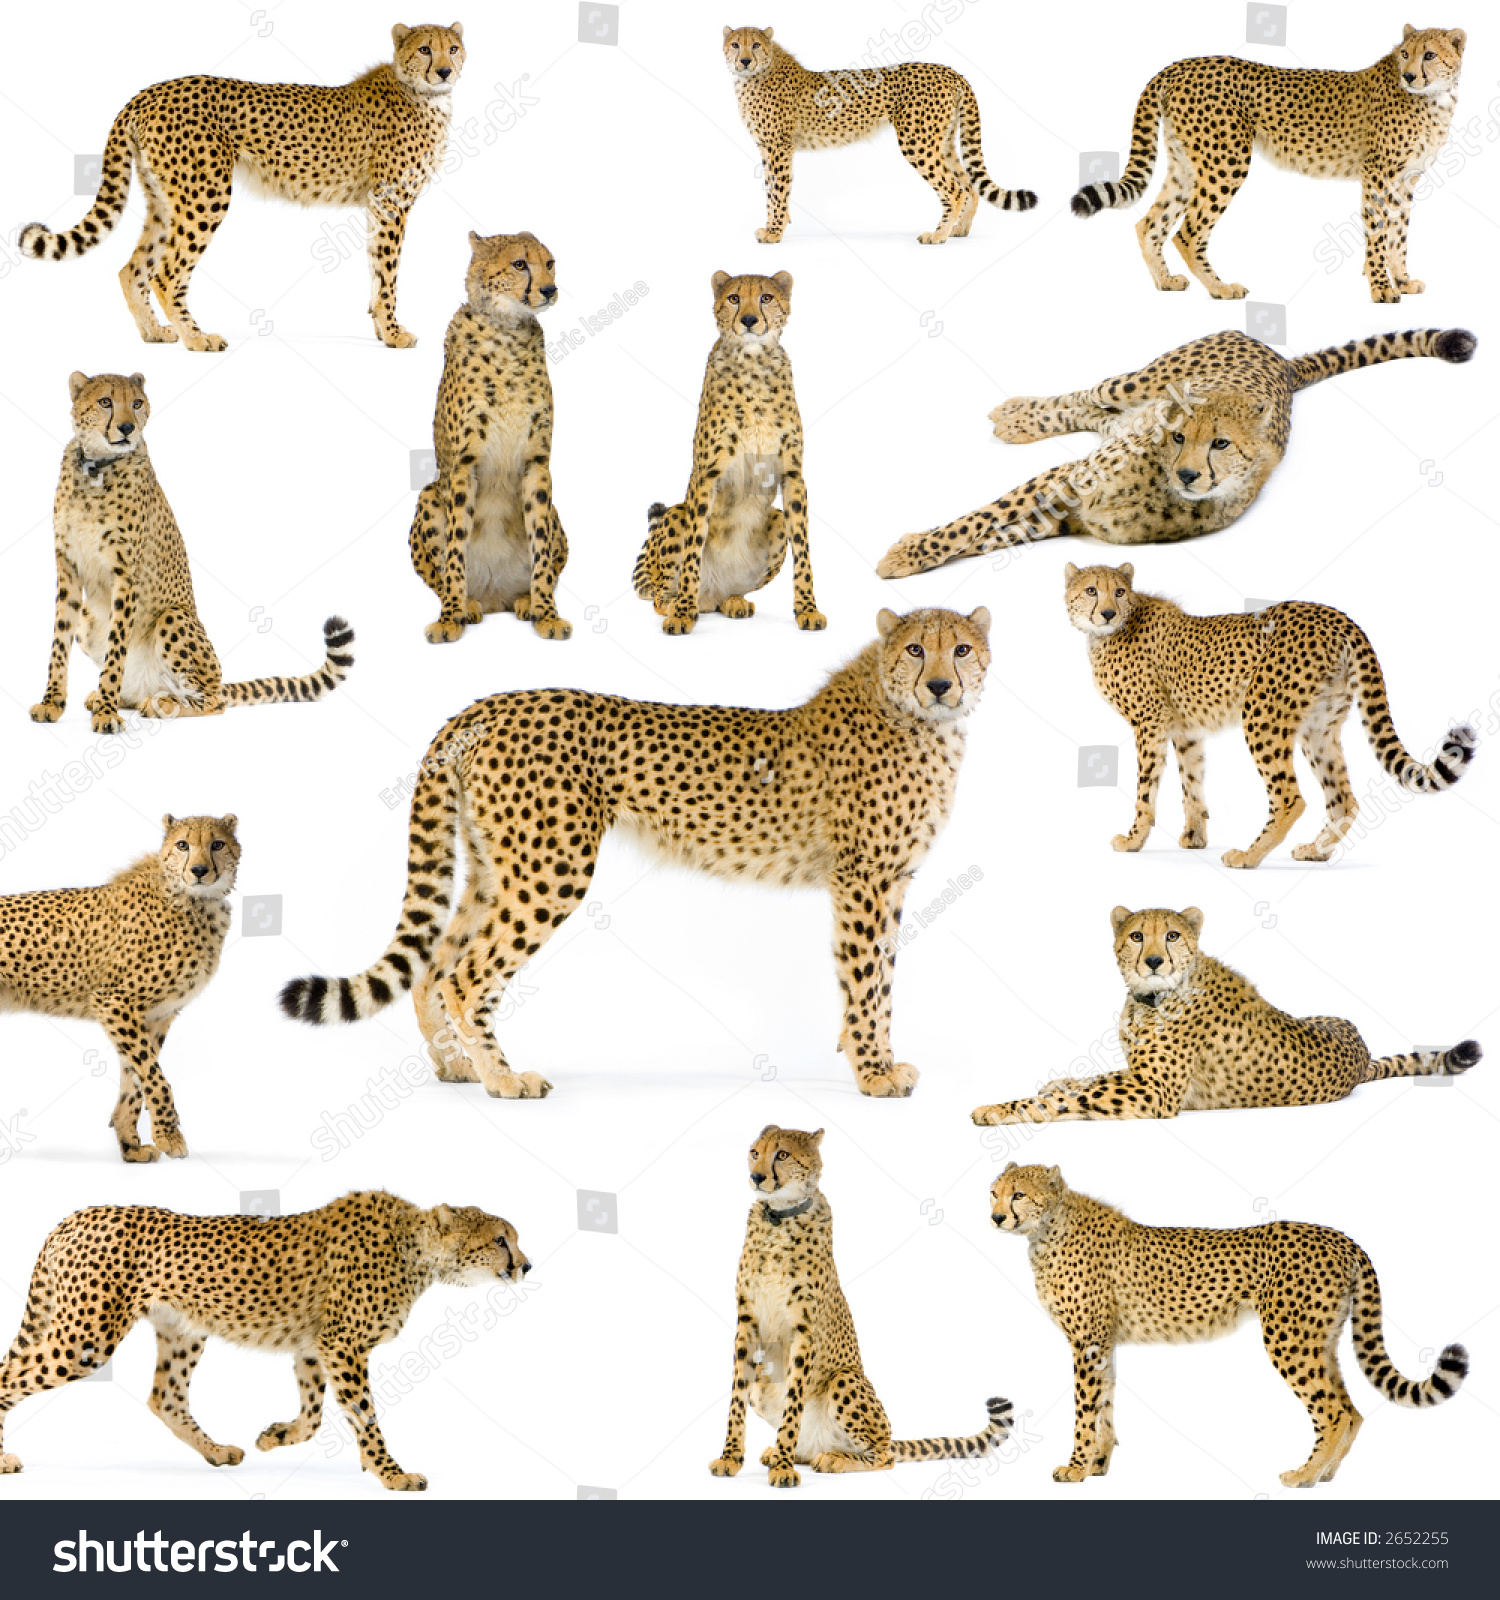 14 studio Shots of Cheetahs in different position, isolated on a white background. All my pictures are taken in a photo studio #2652255